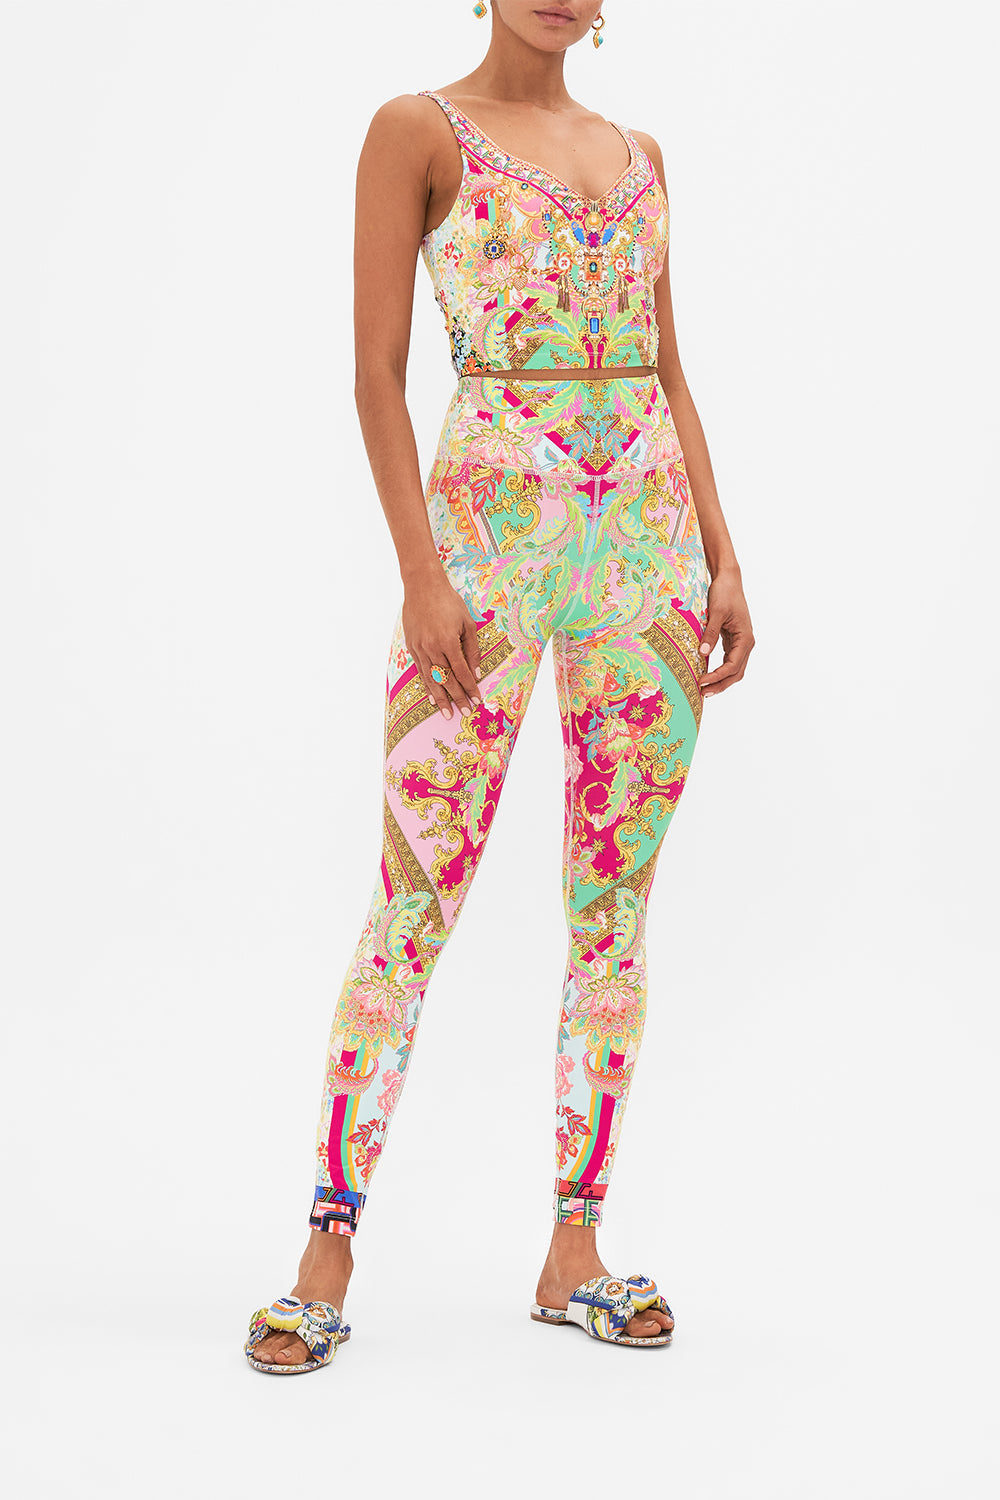 Front view of model wearing CAMILLA printed activewear legging in Ciao Bella print